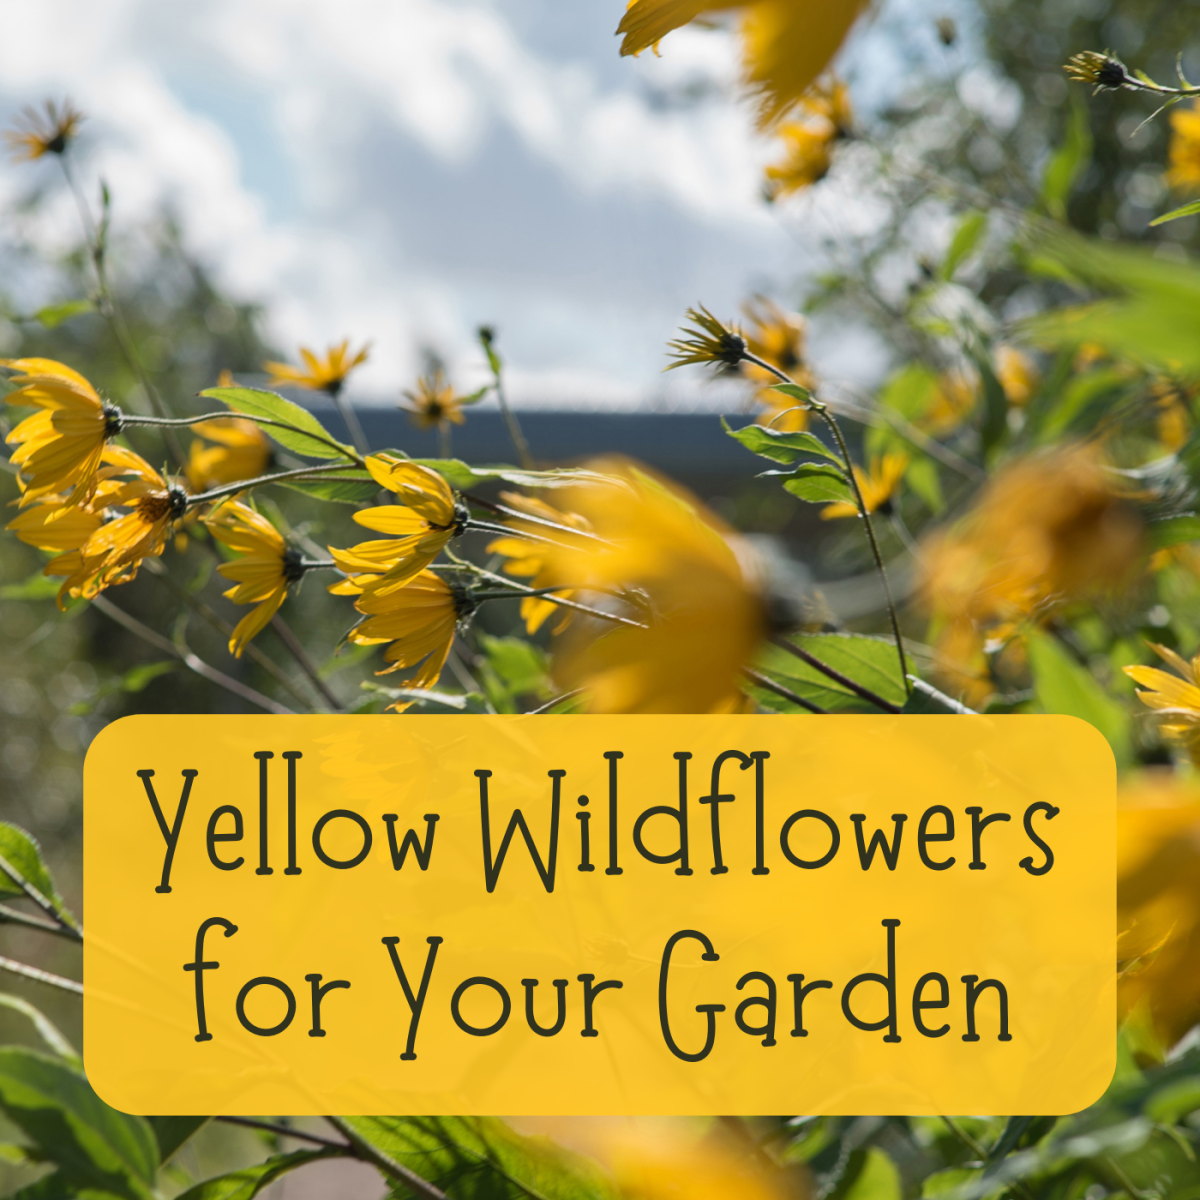 8 Yellow Wildflowers That Will Make Your Garden Better